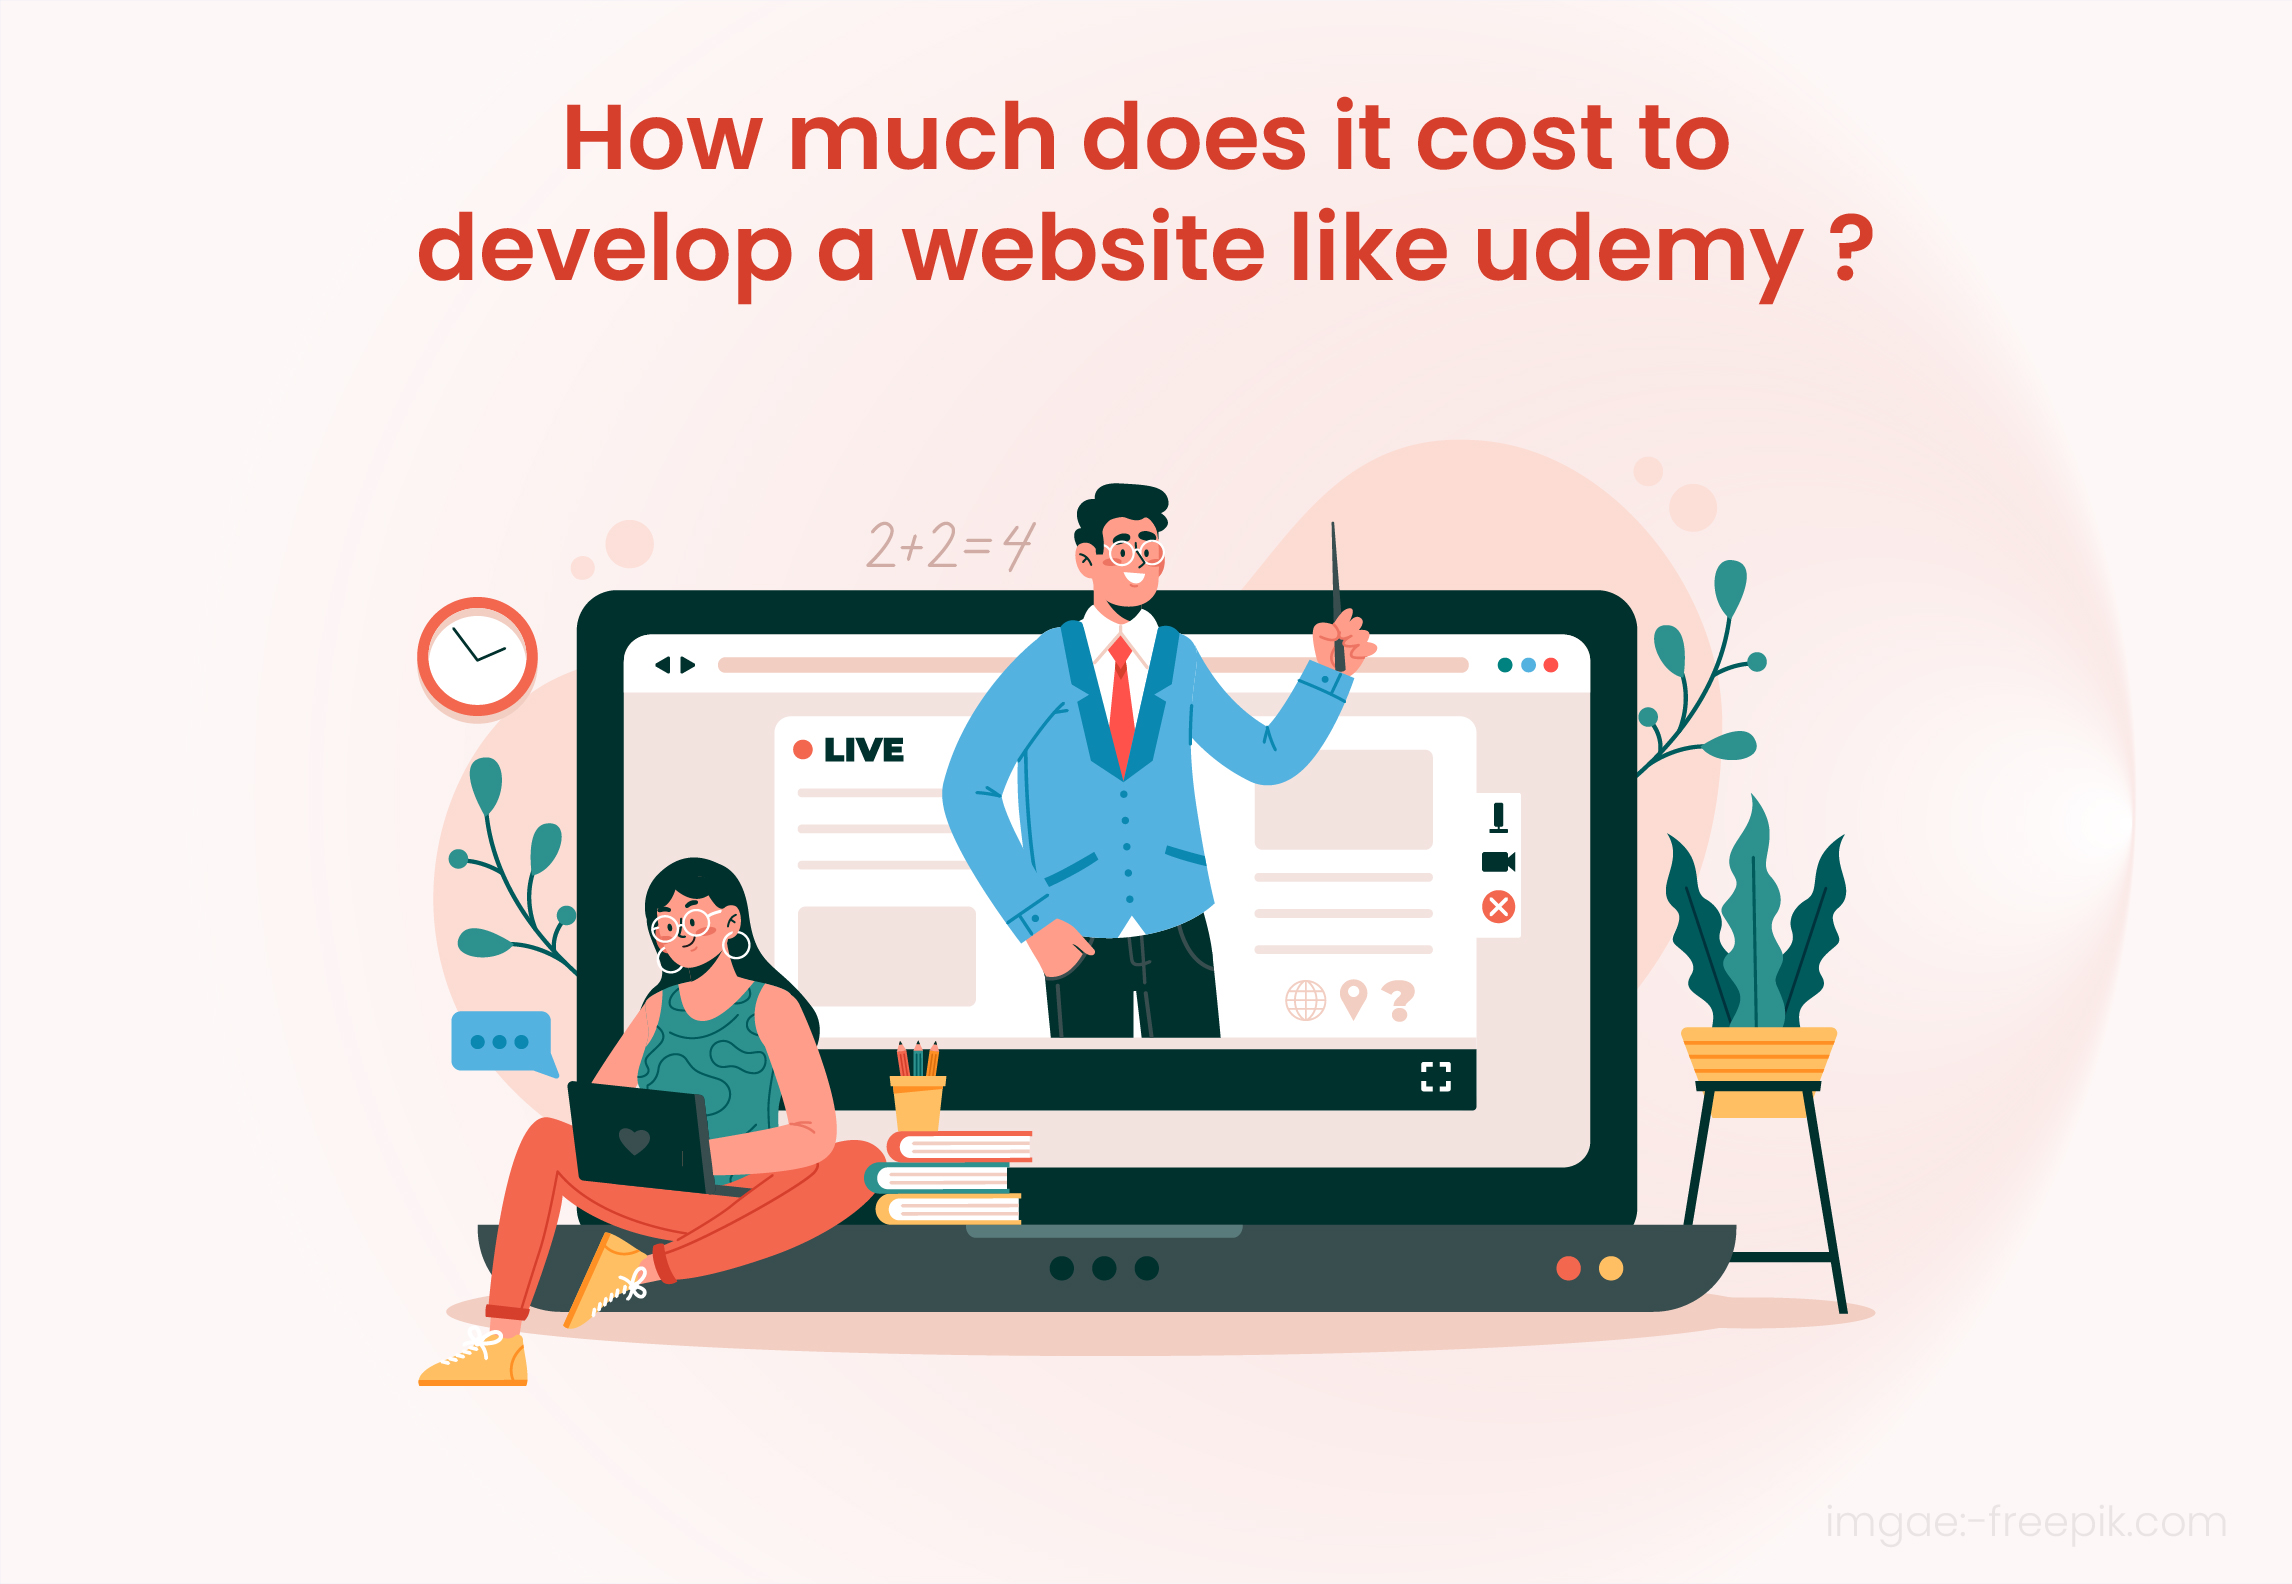 Cost of building an E-learning website like Udemy